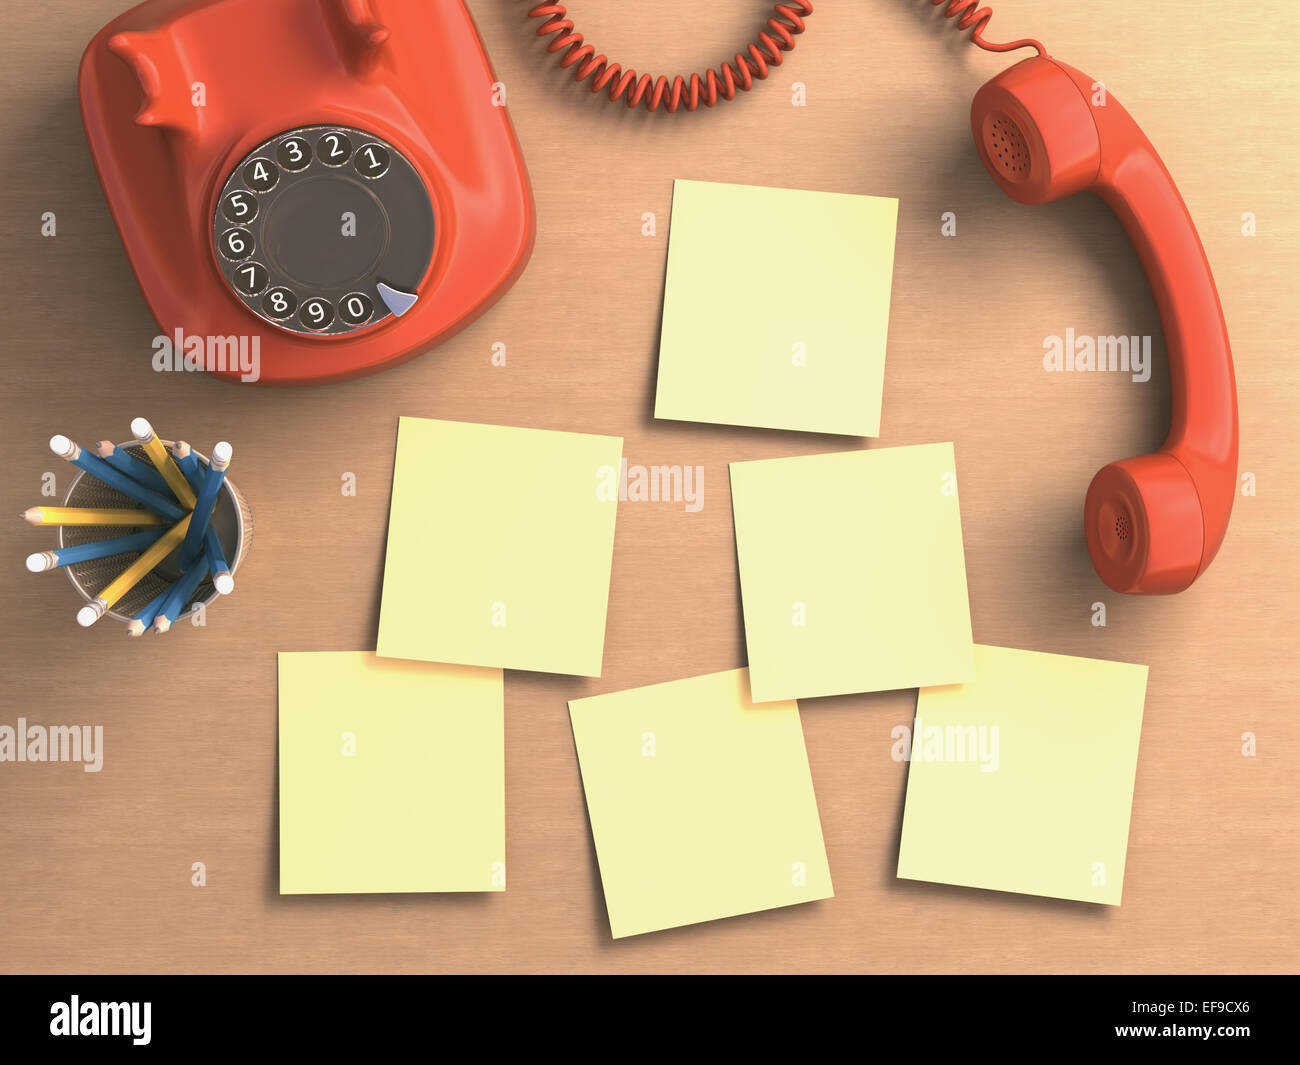 Phone off the hook with sticky notes on the table. Clipping path included on the blank notes. Stock Photo